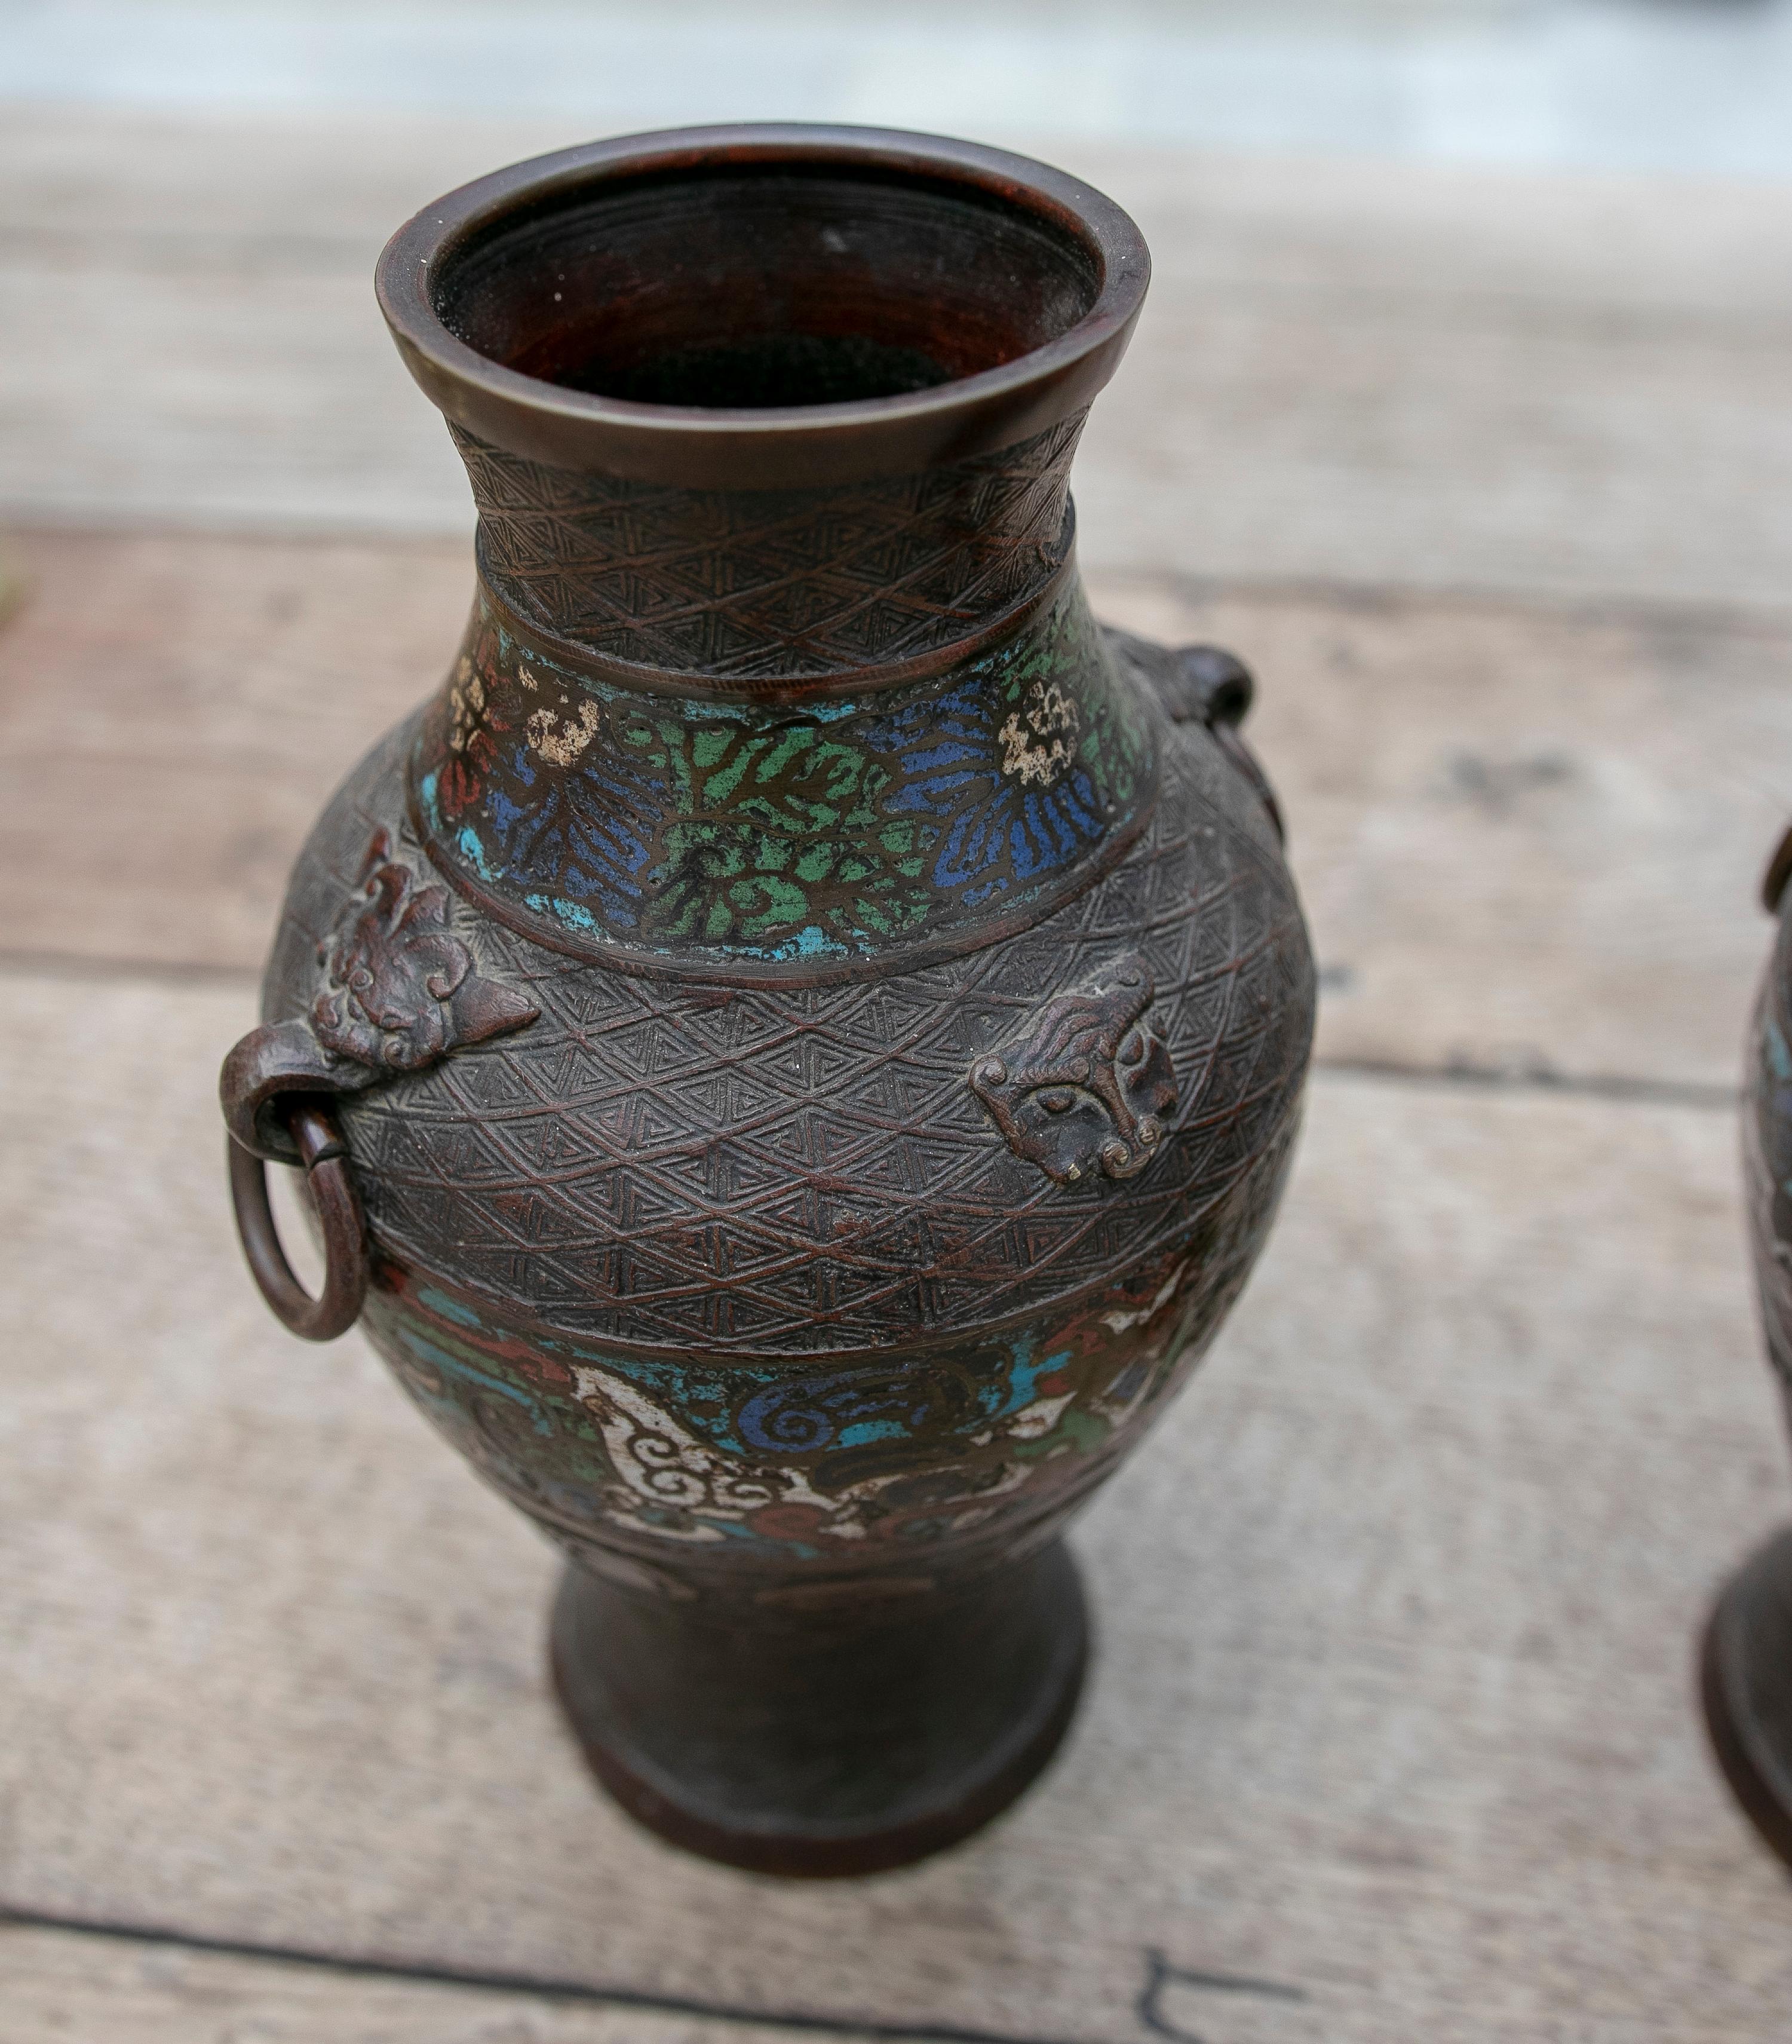 19th Century Chinese Pair of Bronze Vases with Cloissoné Technique For Sale 12